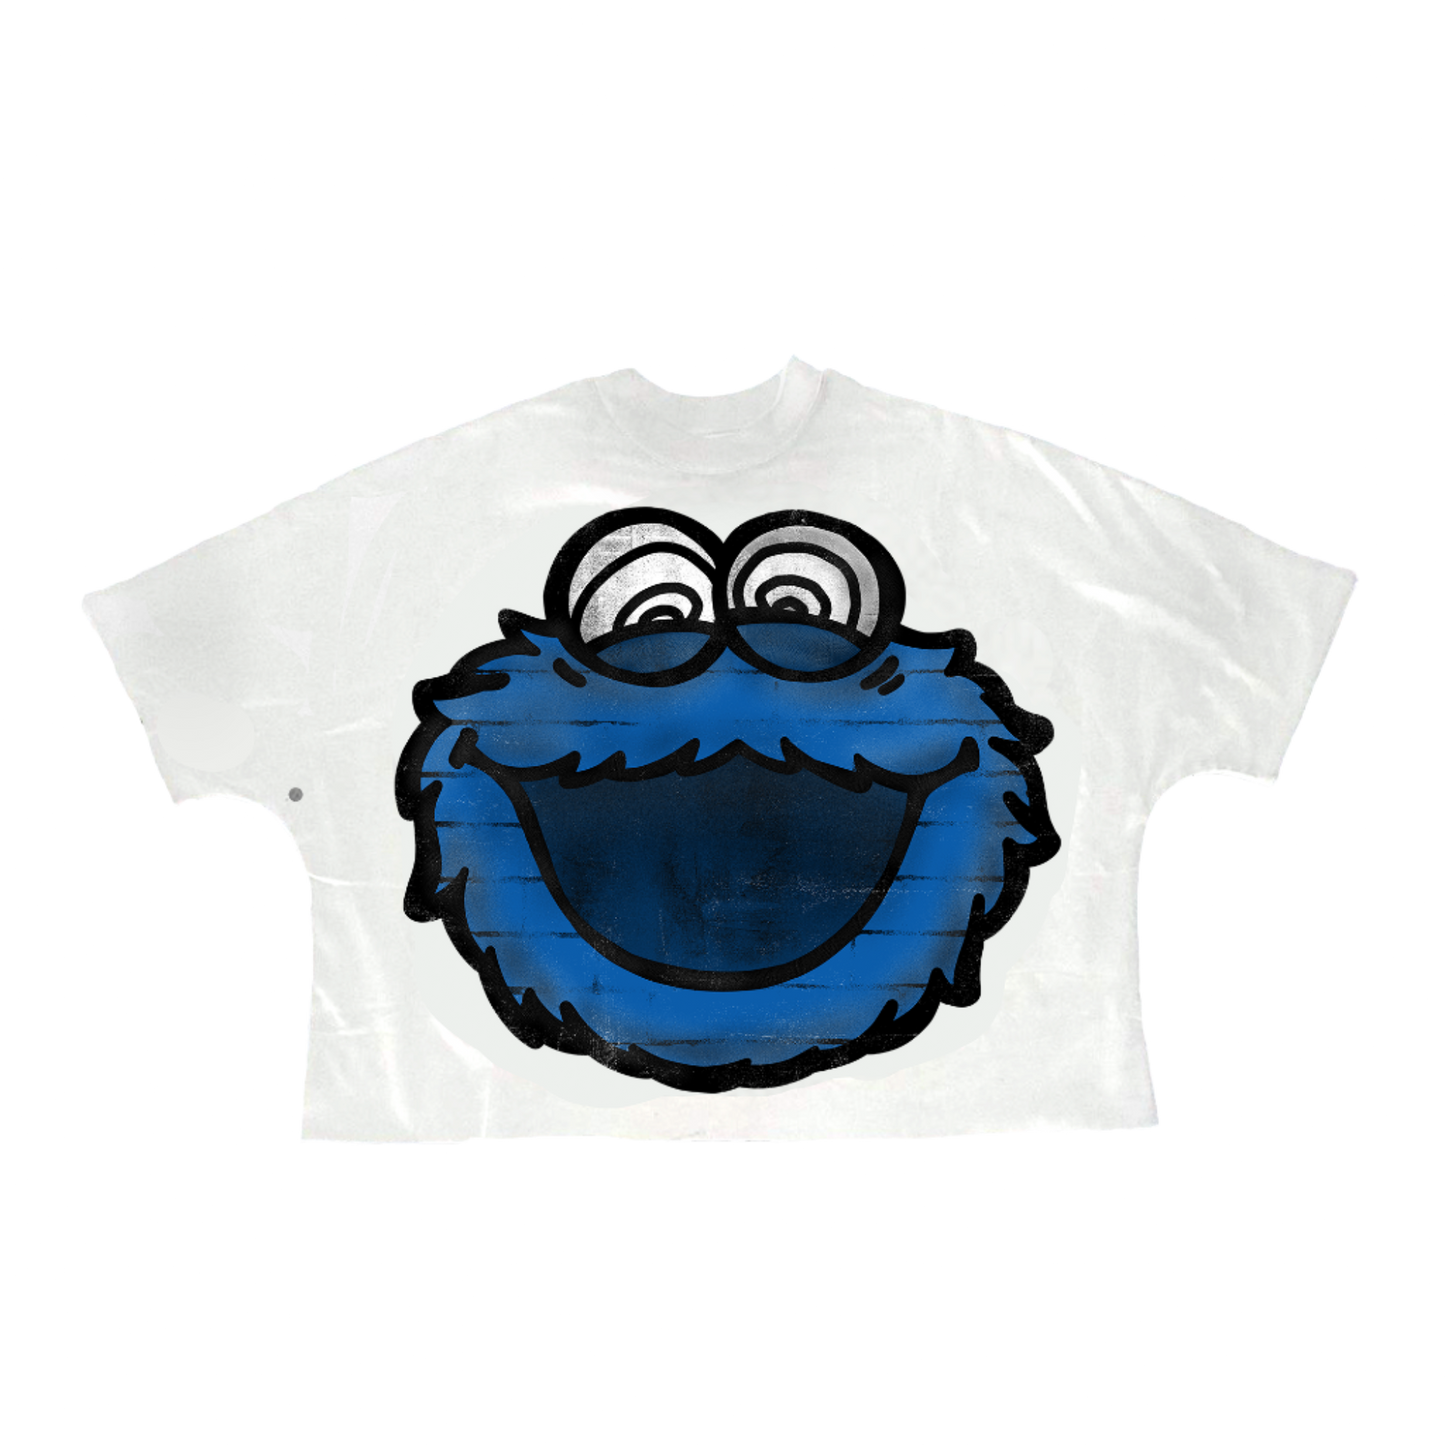 COOKIE MONSTER BIG FACE